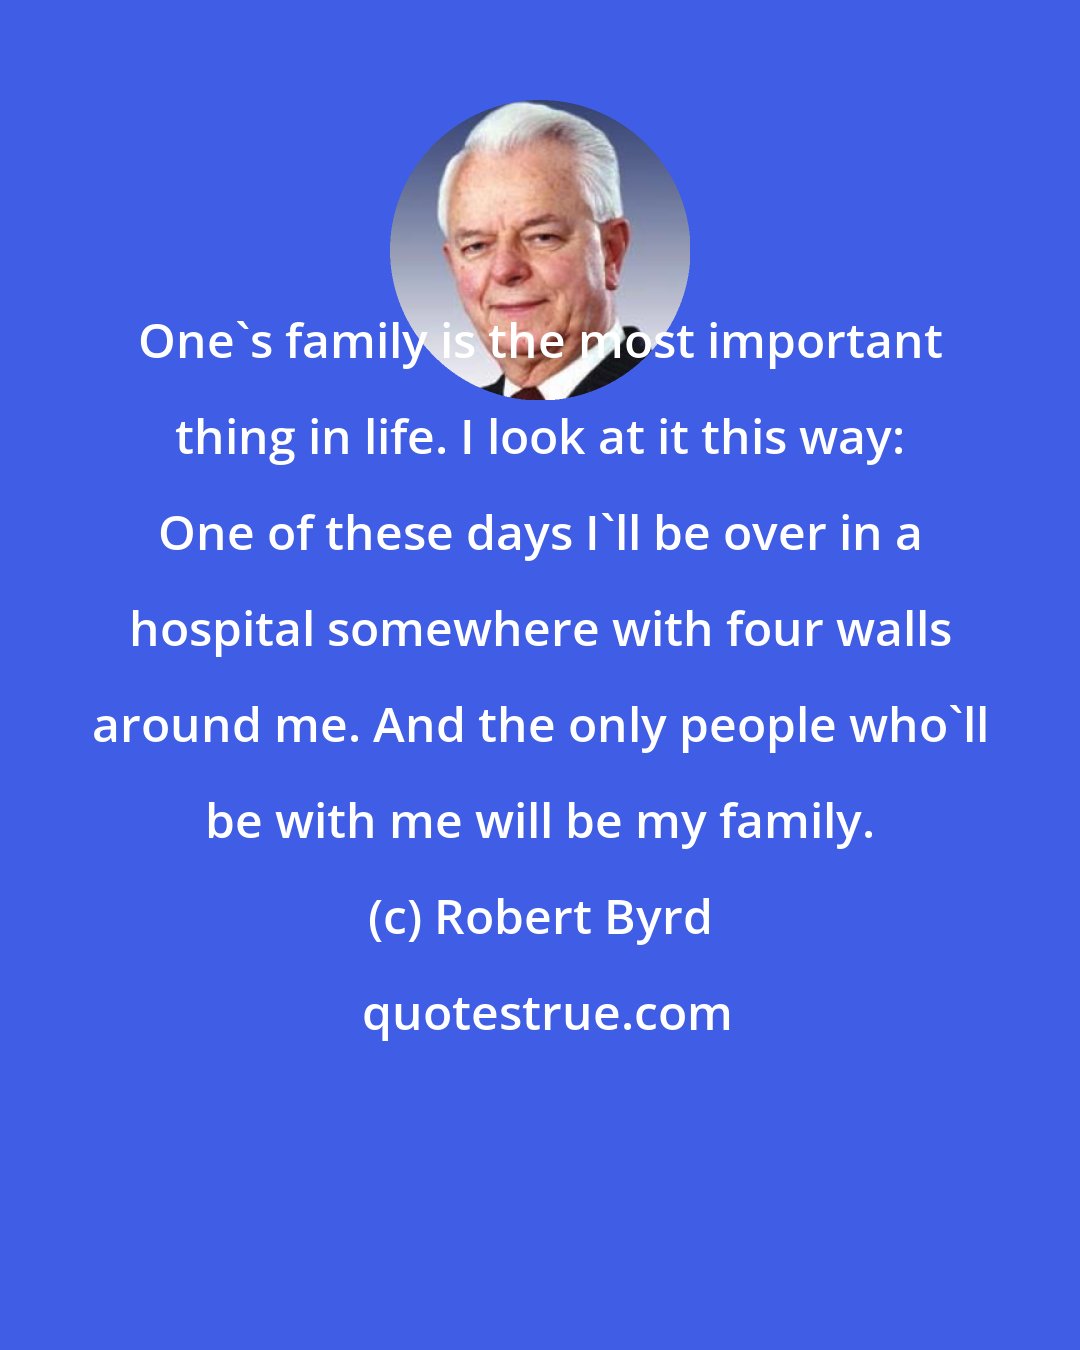 Robert Byrd: One's family is the most important thing in life. I look at it this way: One of these days I'll be over in a hospital somewhere with four walls around me. And the only people who'll be with me will be my family.